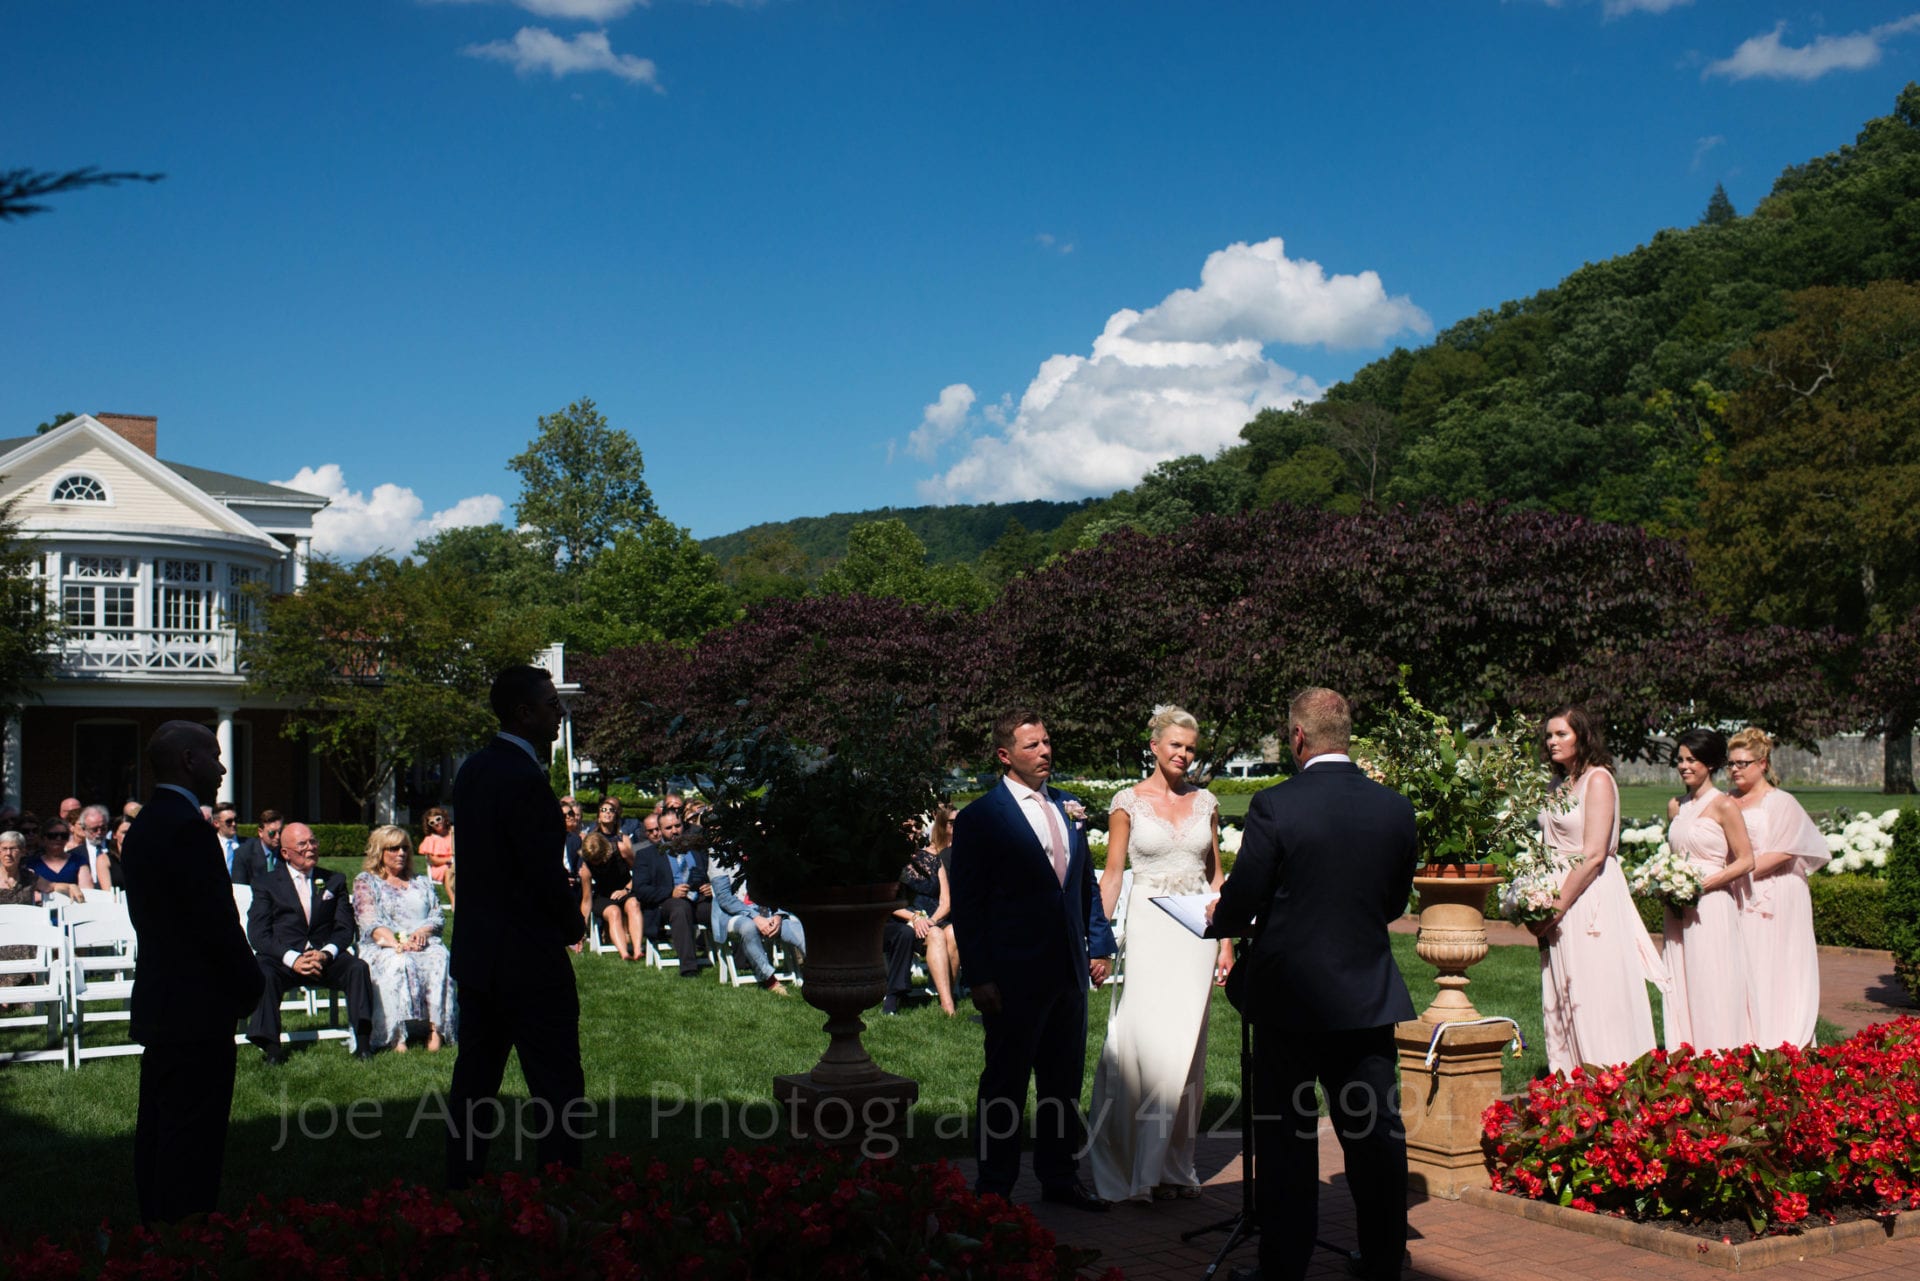 With the Allegheny Mountains in the background, a bride and groom stand on a lawn beneath a blue sky during their wedding ceremony during their Omni Bedford Springs Resort Wedding.